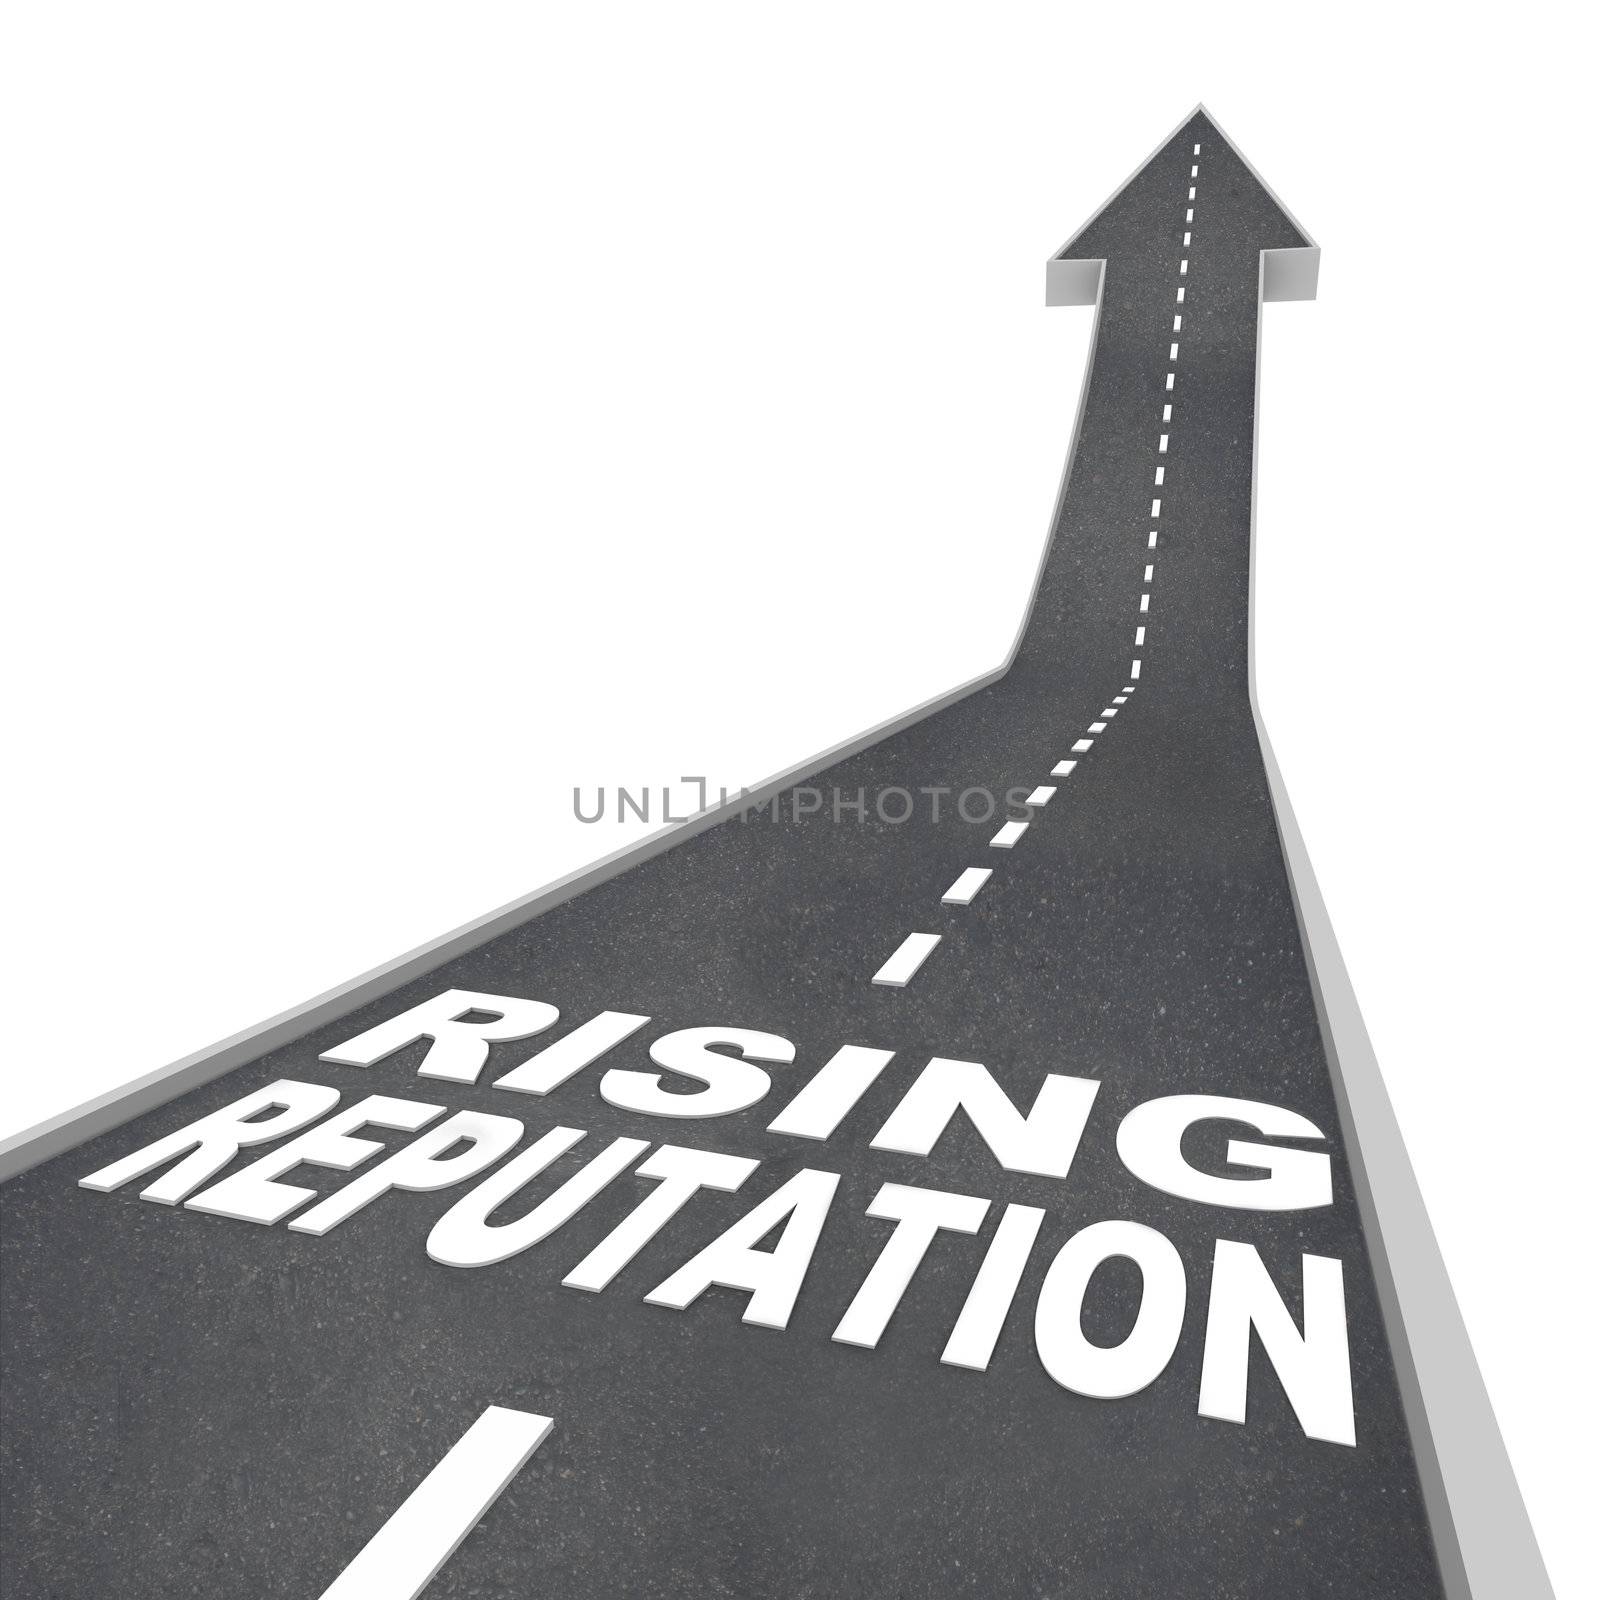 Rising Reputation - Road Arrow Up Improved Stature Opinion by iQoncept